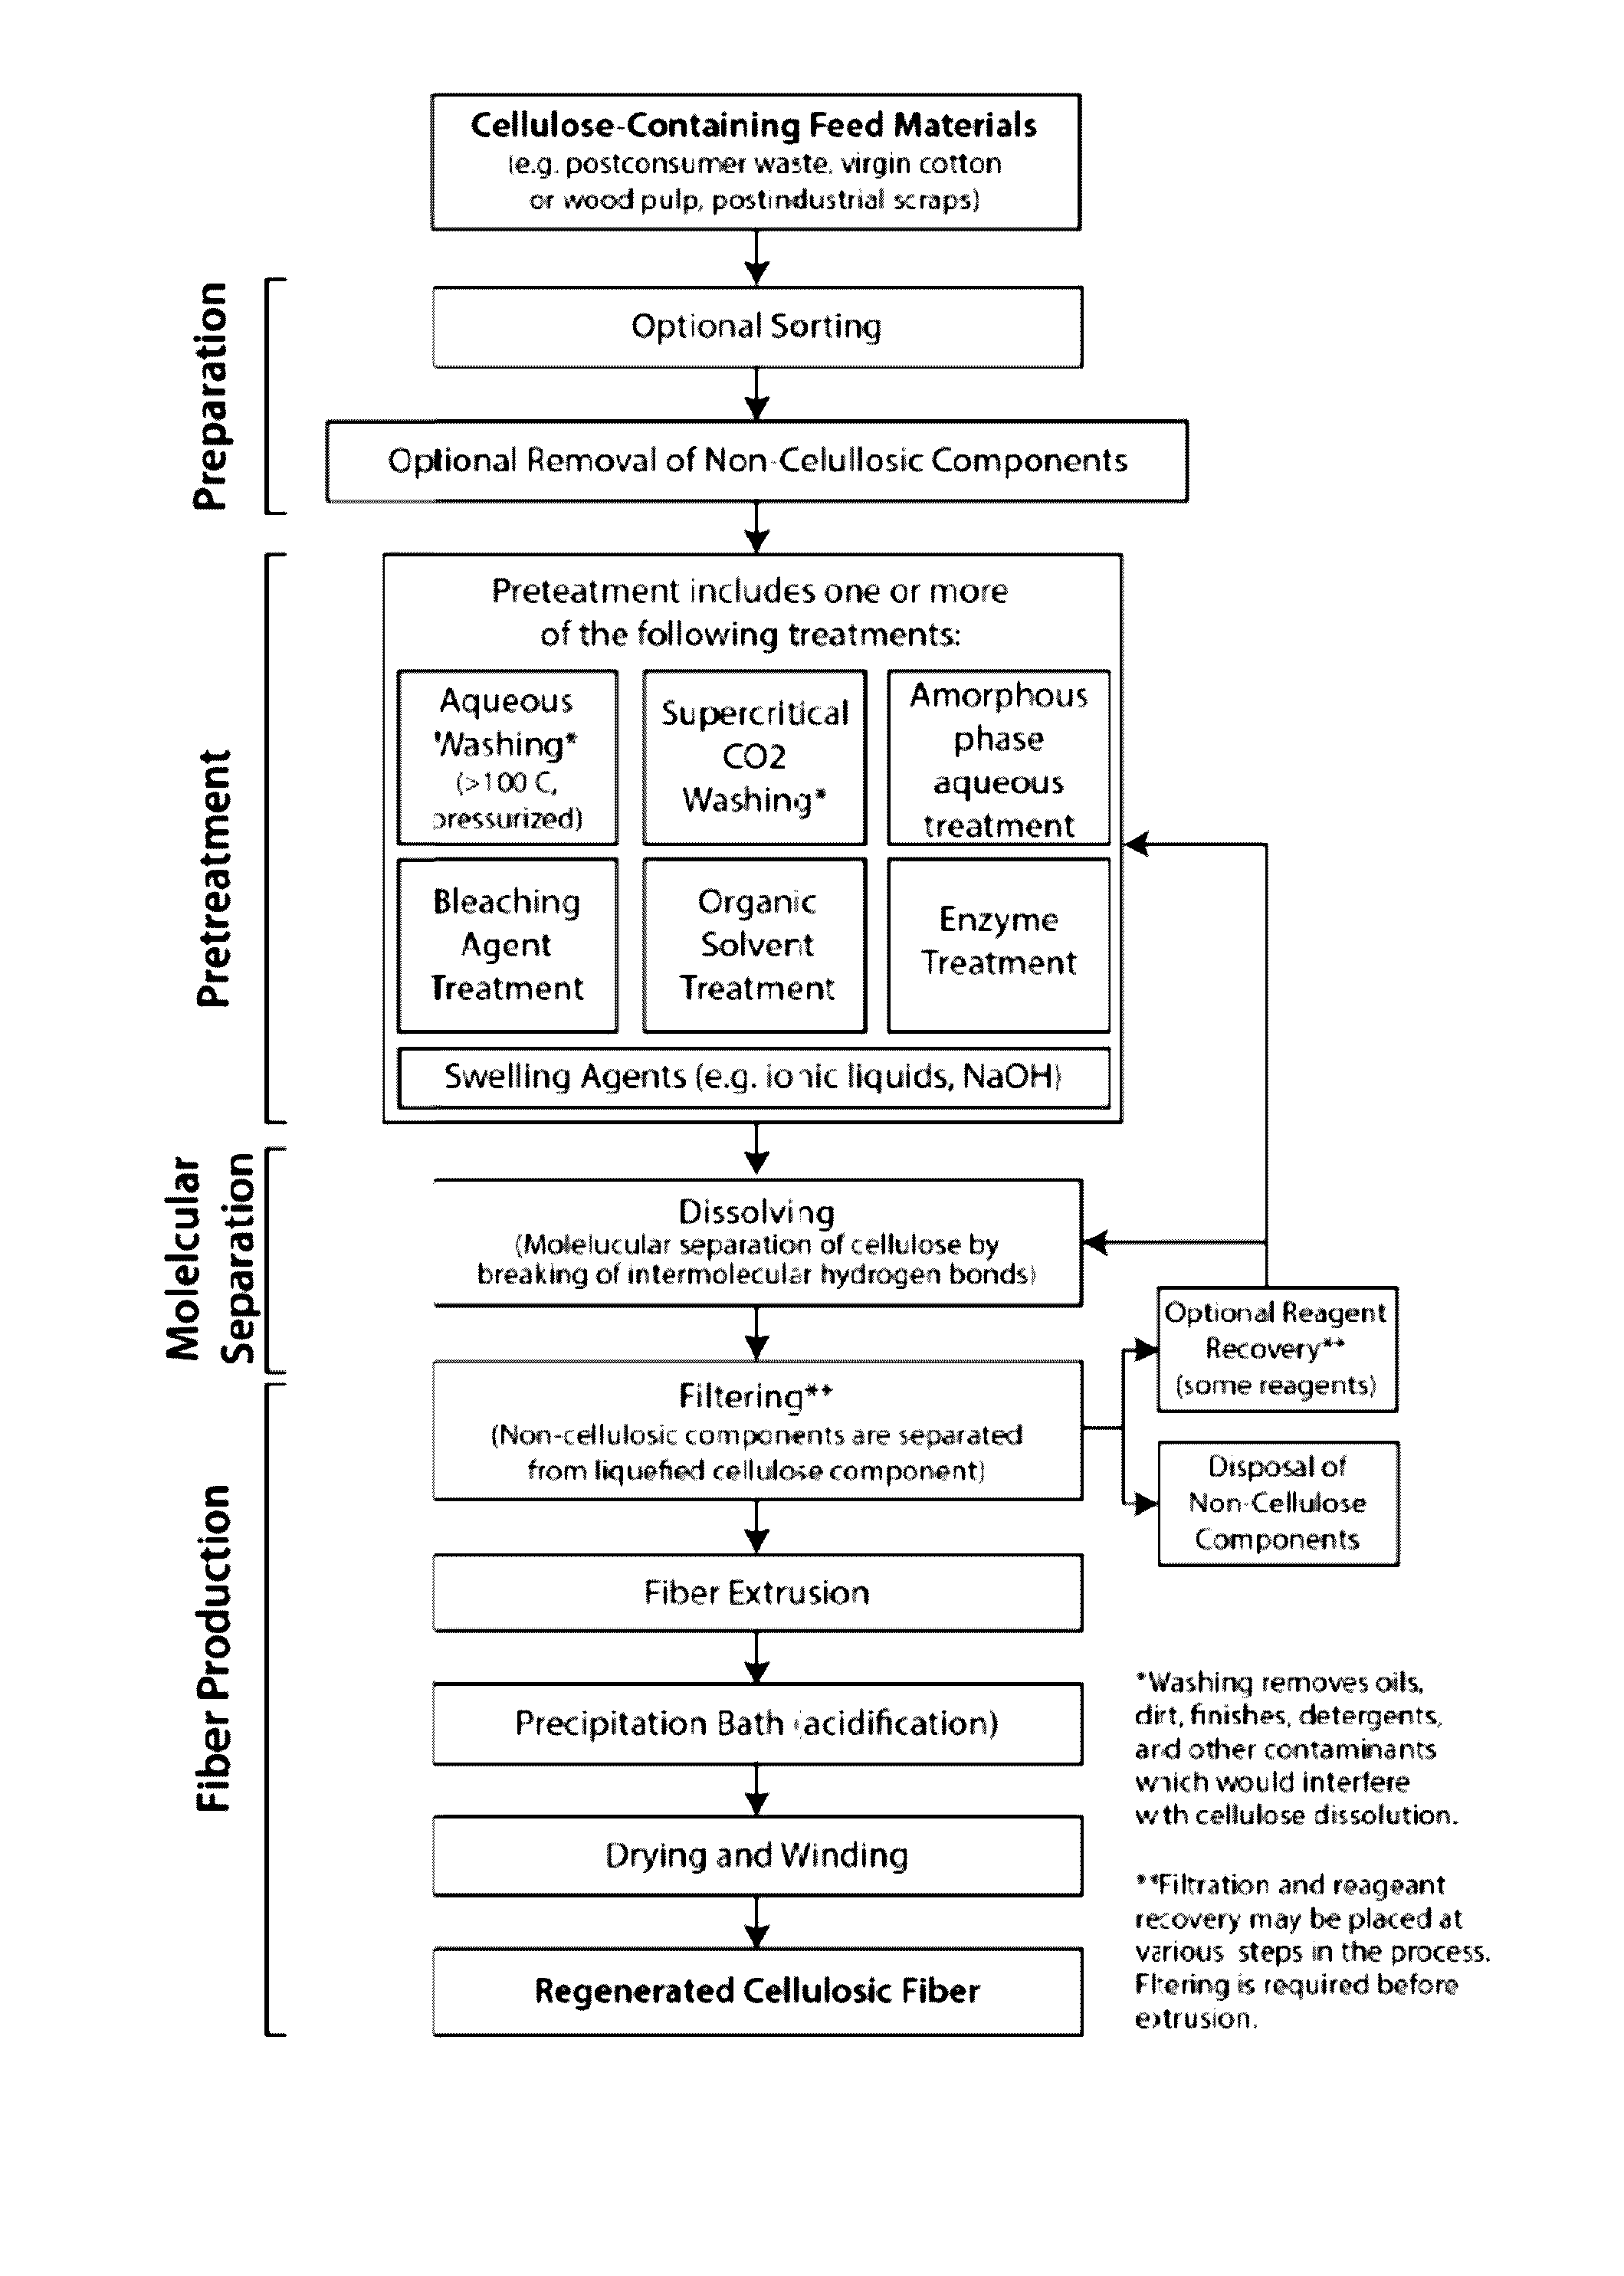 Methods and systems for processing cellulose-containing materials and isolating cellulose molecules; methods for regenerating cellulosic fibers